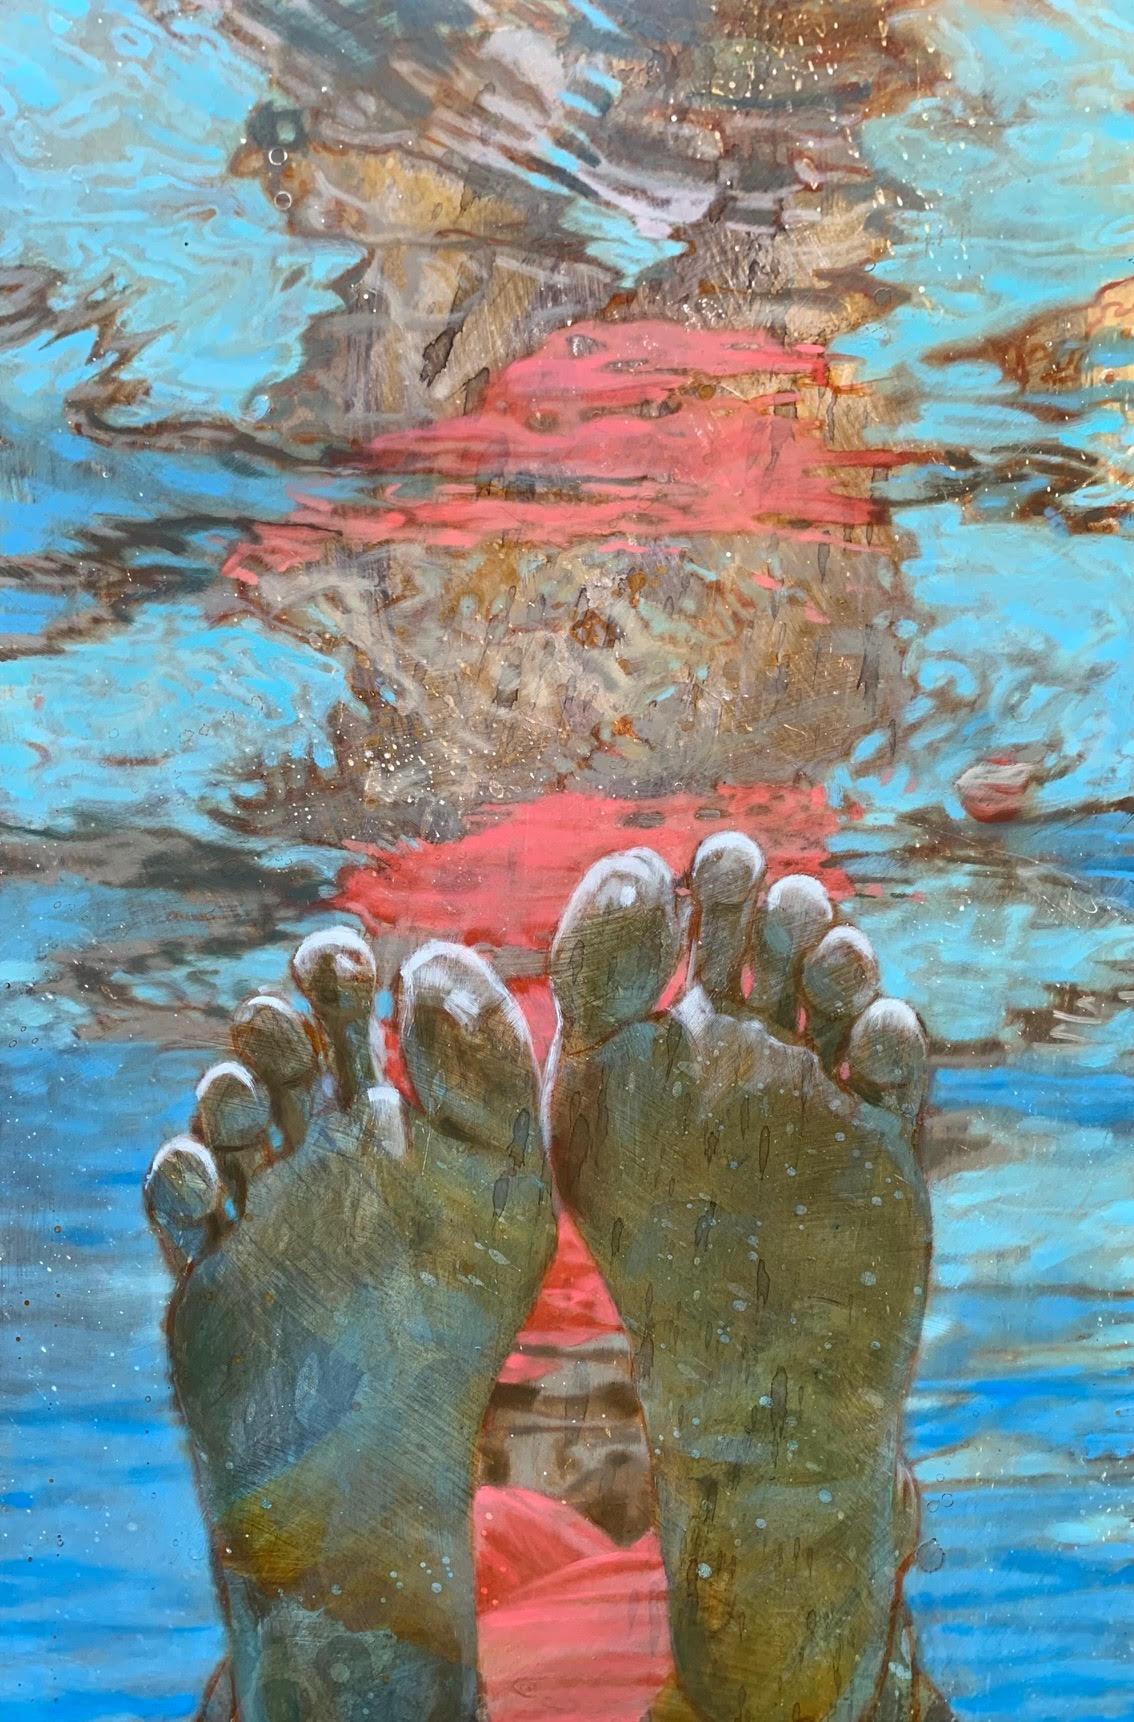 Carol Bennett Figurative Painting - "Tickled Pink" oil painting of the feet of a woman floating in ocean